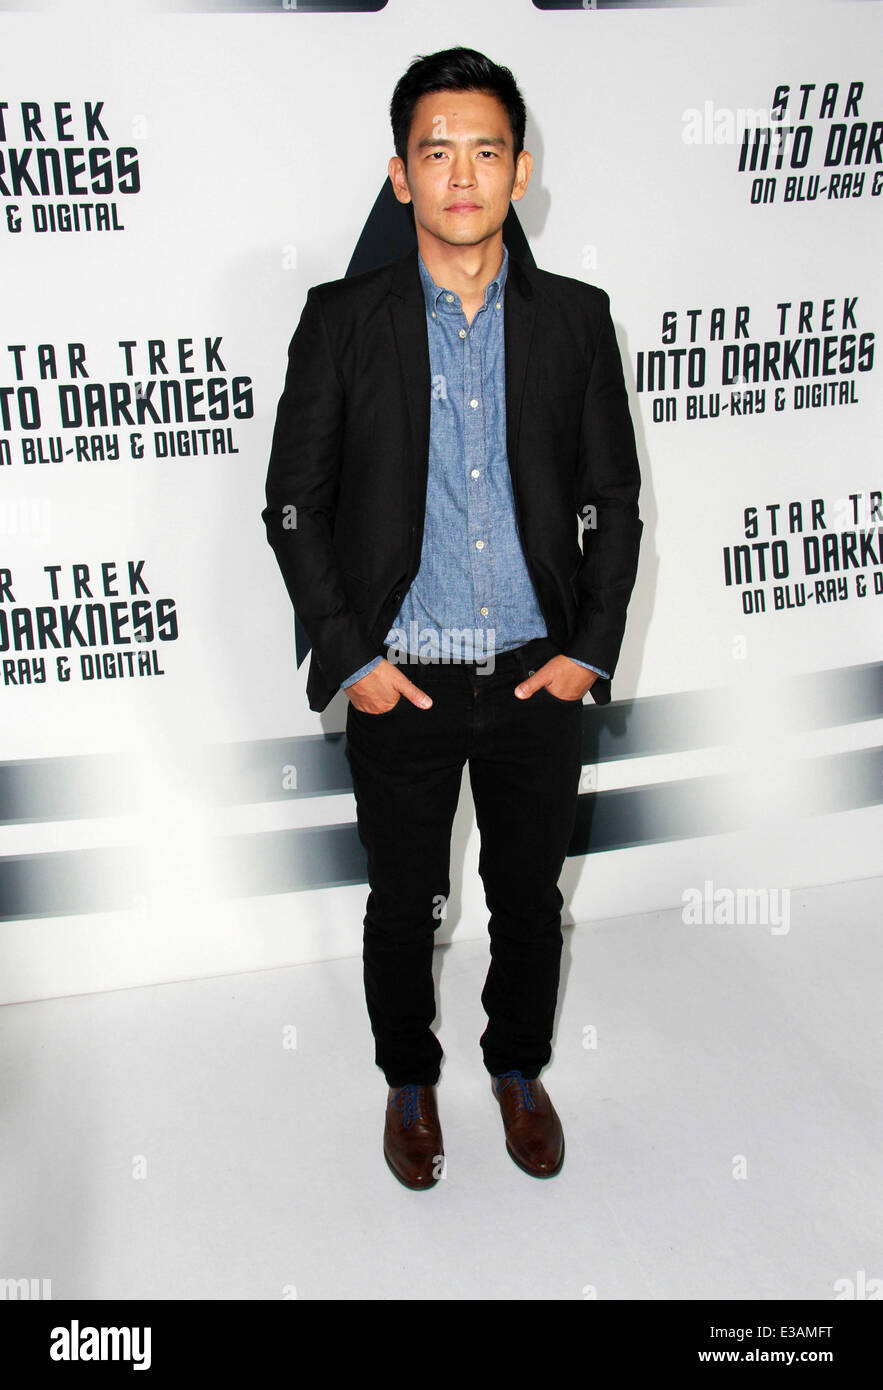 Paramount Pictures Celebrates The Blu-ray And DVD Debut Of 'Star Trek: Into Darkness' Held at California Science Center  Featuring: John Cho Where: Los Angeles, California, United States When: 11 Sep 2013 Stock Photo